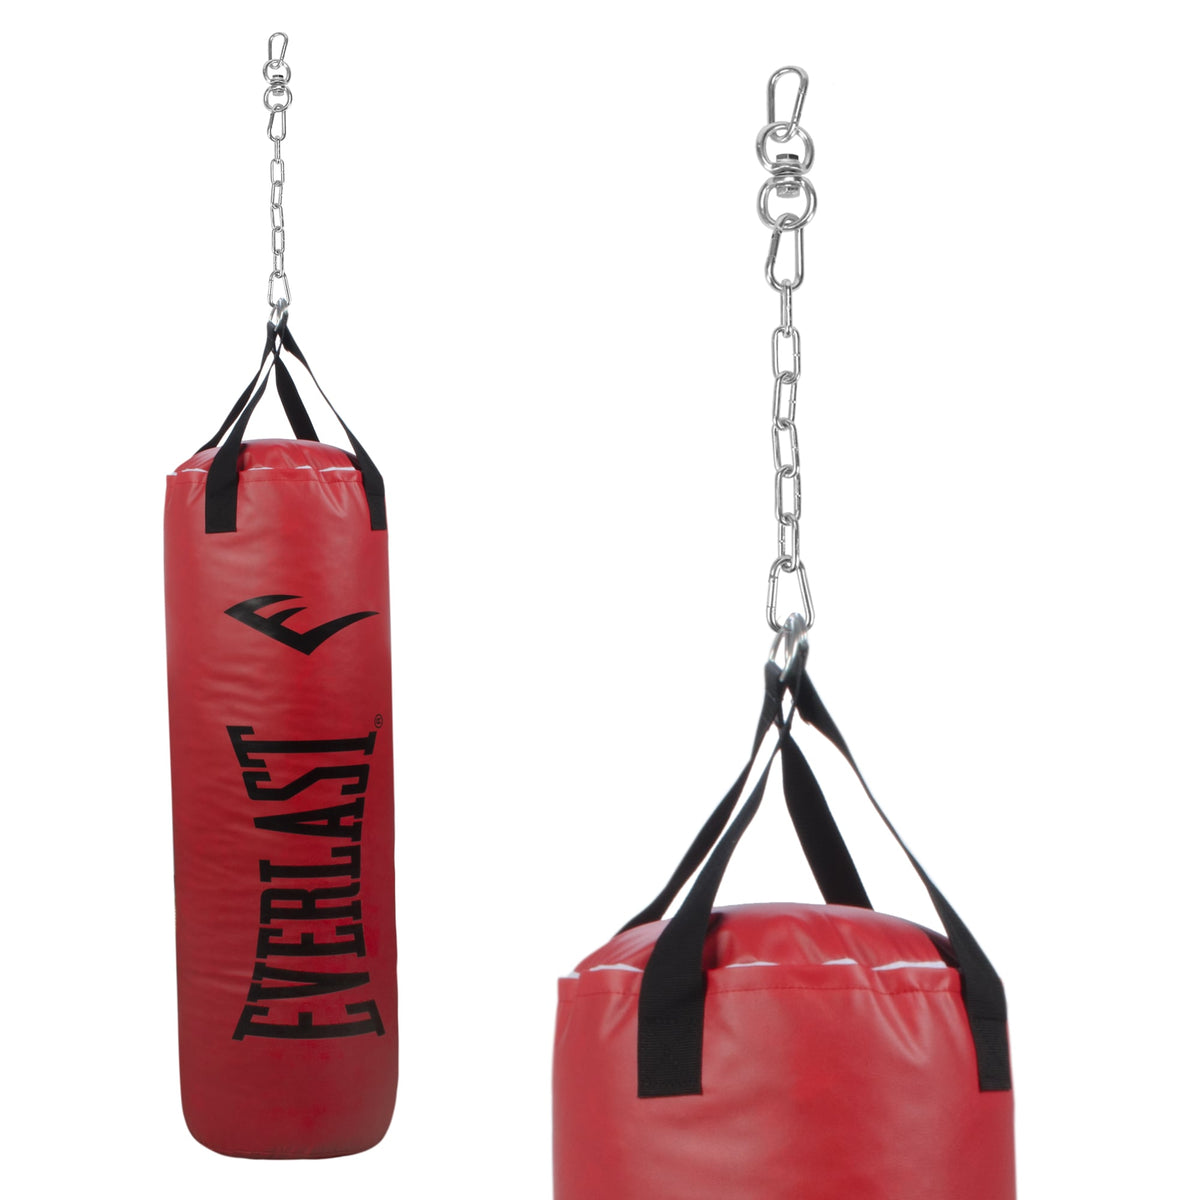 Everlast Everstrike Nevatear™ Heavy Bag, Premium Synthetic Leather,  Reinforced Webbing, Superior Heavy Bag Construction Increases Durability 